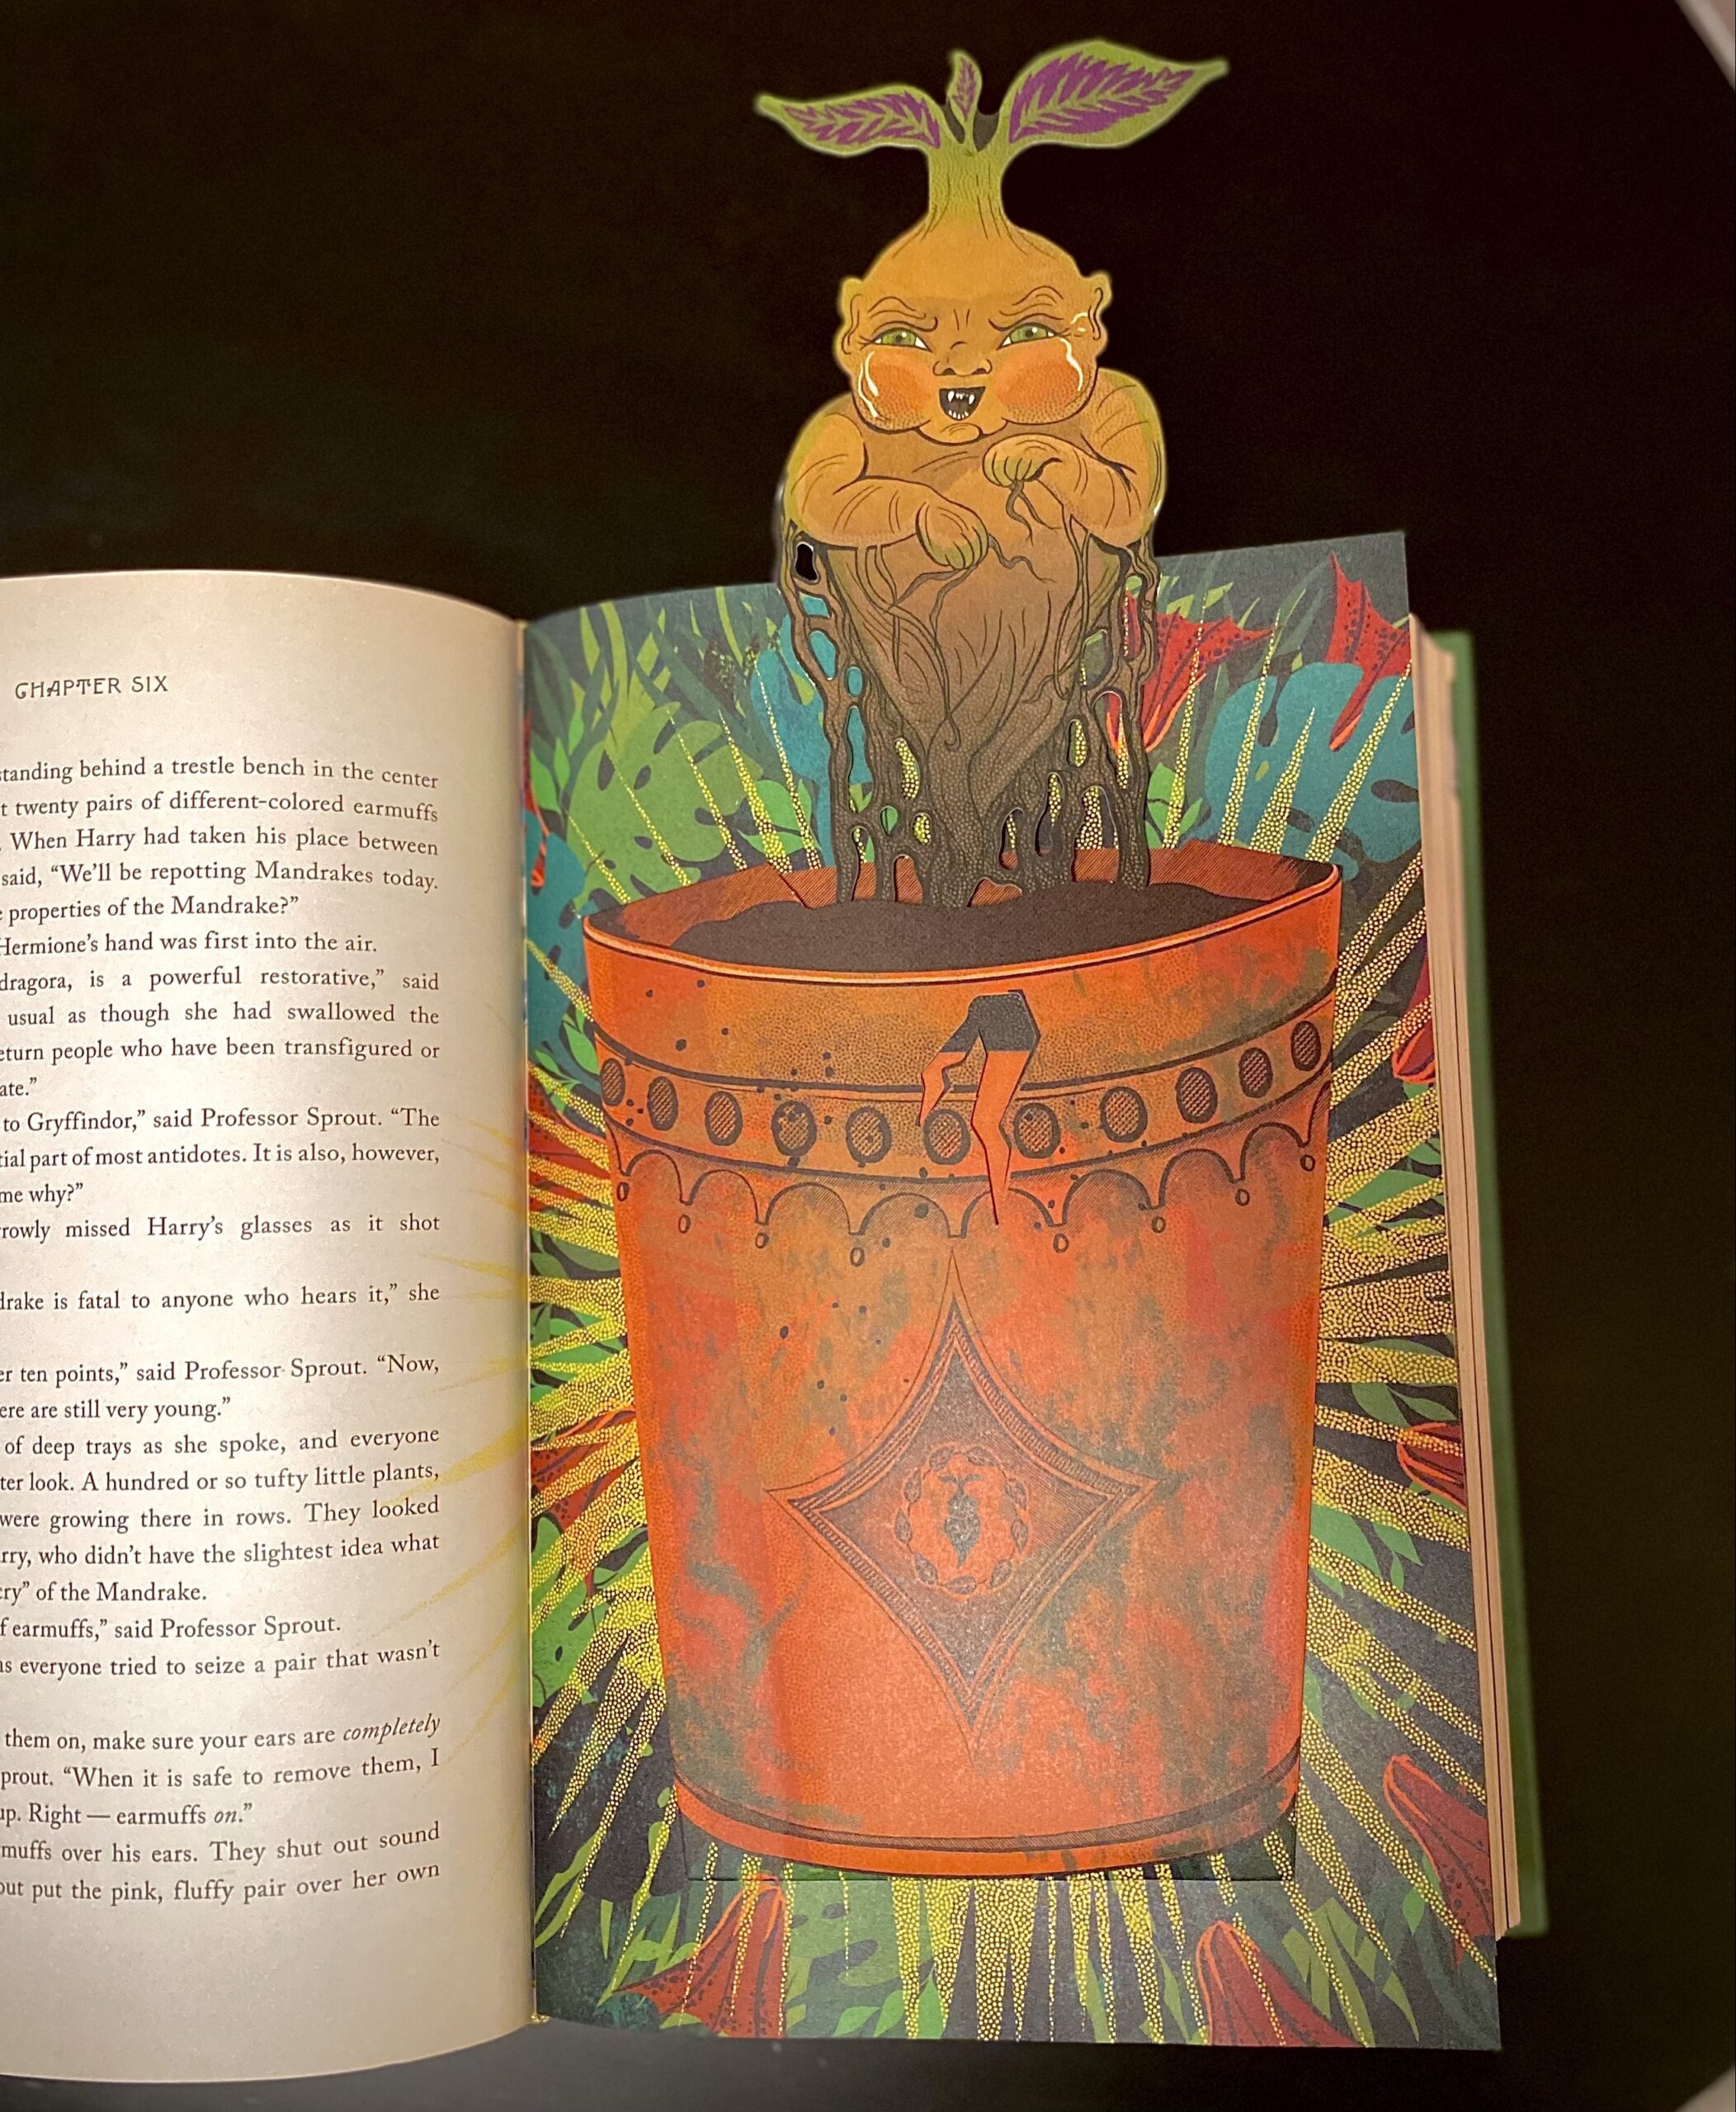 Pulling the mandrake from its pot makes this book even more magical.